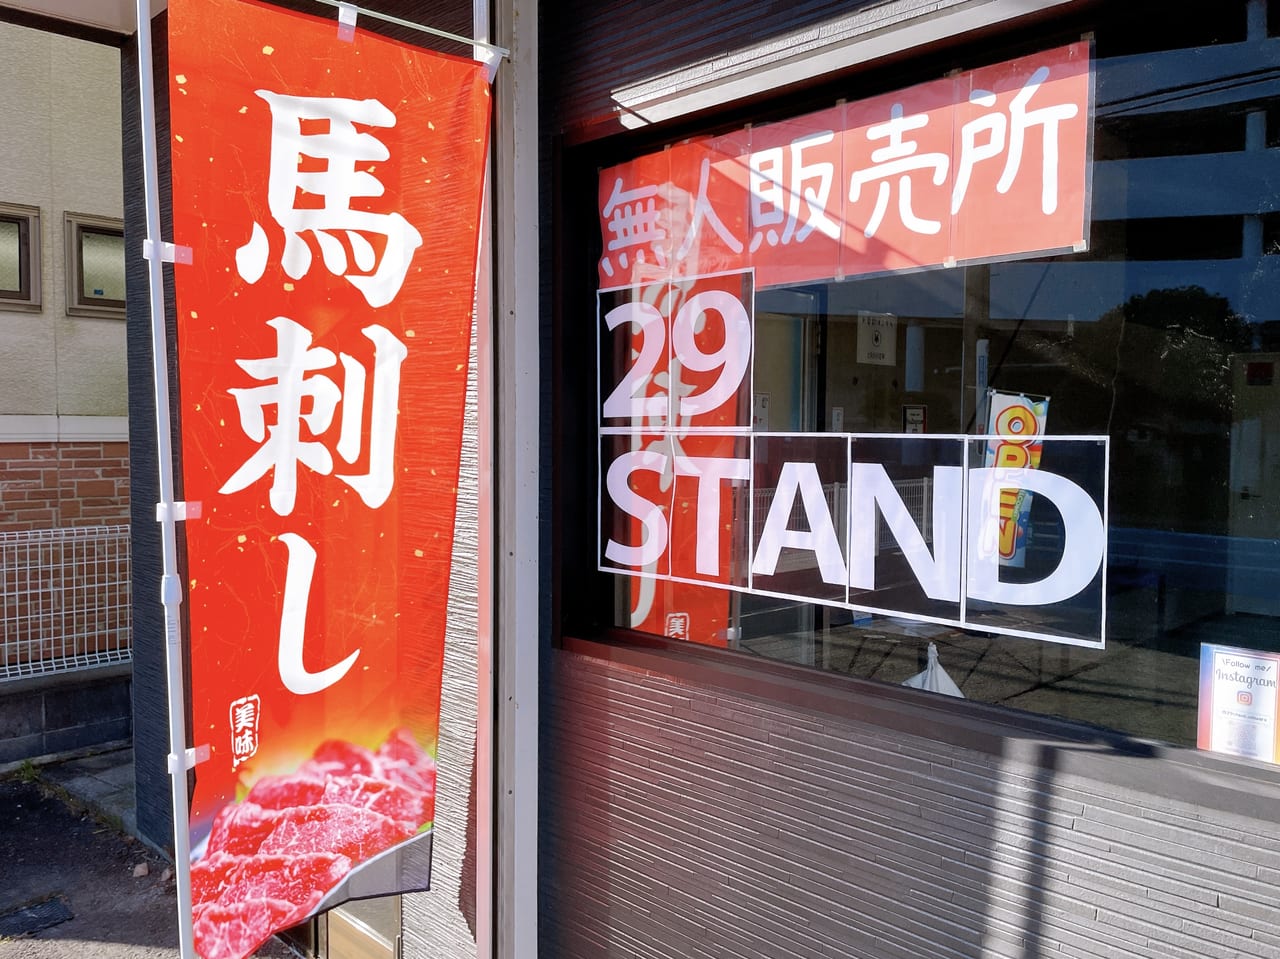 29stand